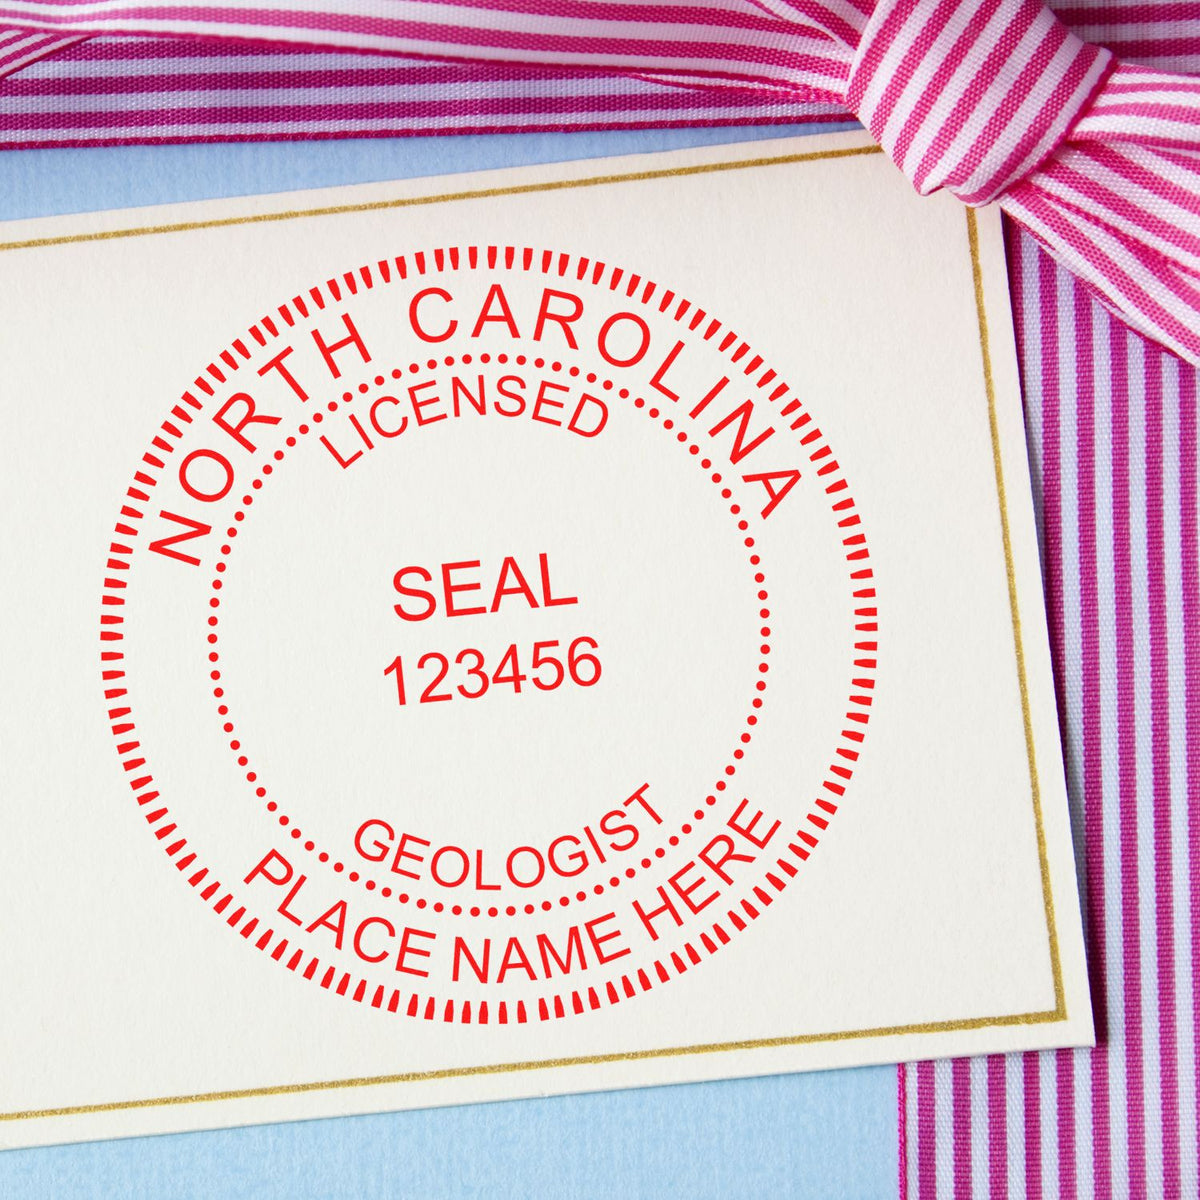 An in use photo of the Slim Pre-Inked North Carolina Professional Geologist Seal Stamp showing a sample imprint on a cardstock